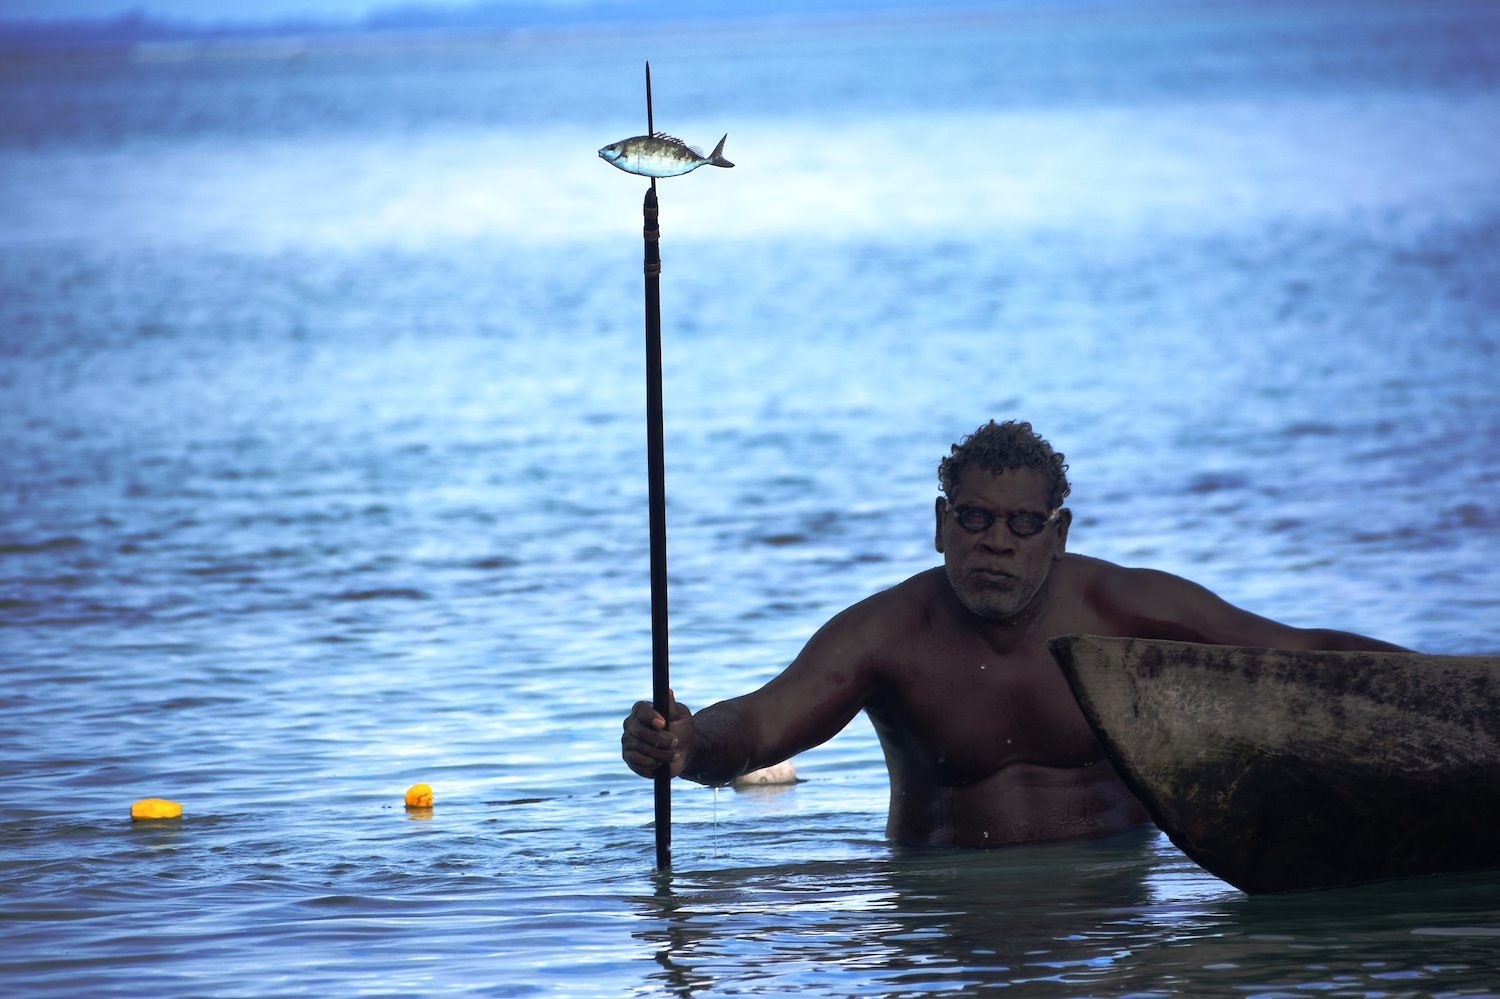 Man with goggles on holding long spear with small fish wading through ocean